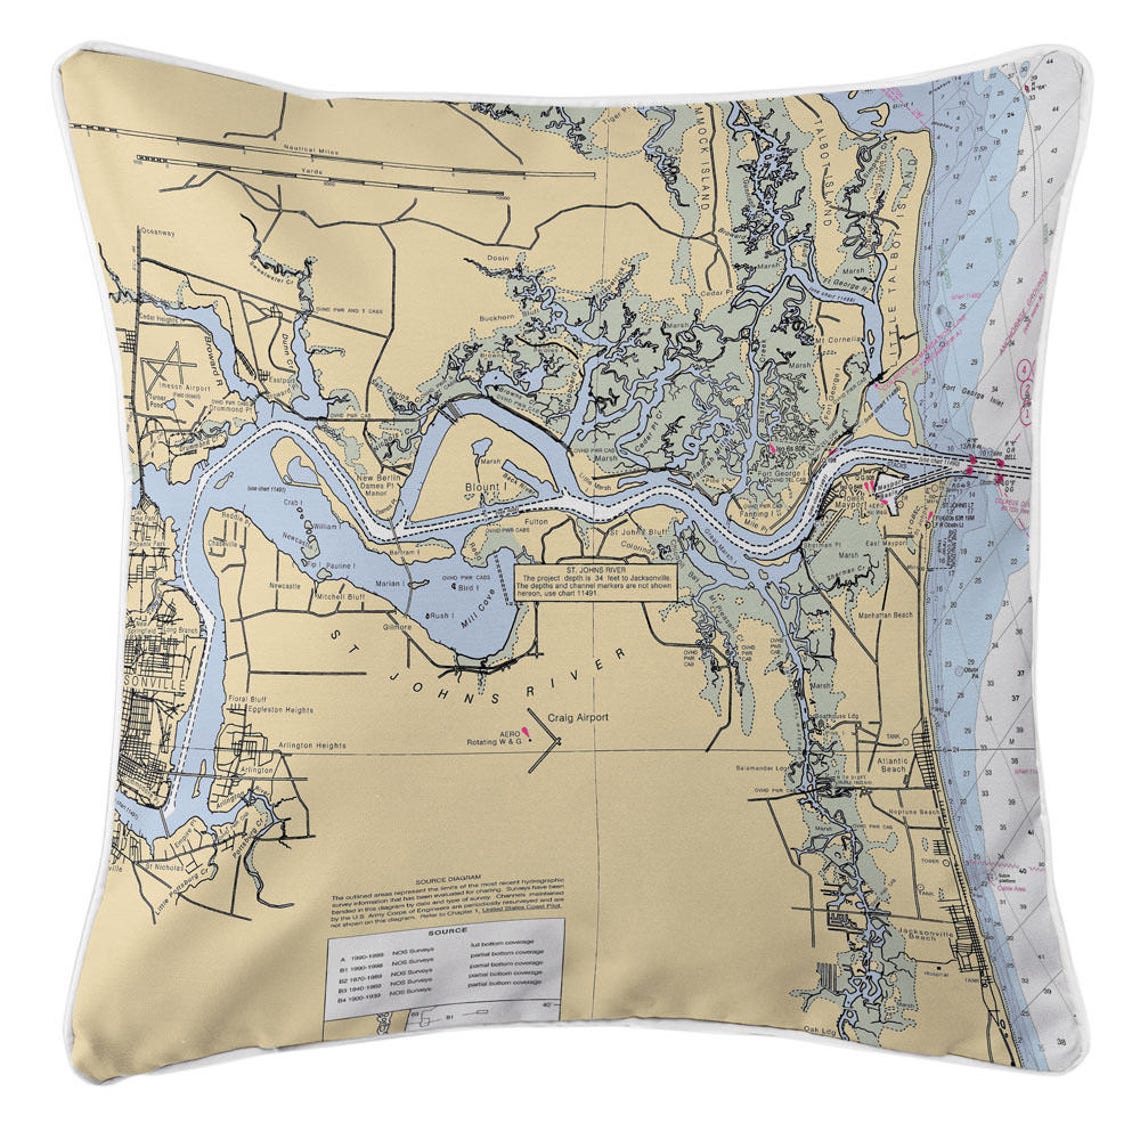 Jacksonville FL Nautical Chart Pillow / Made to Order | Etsy